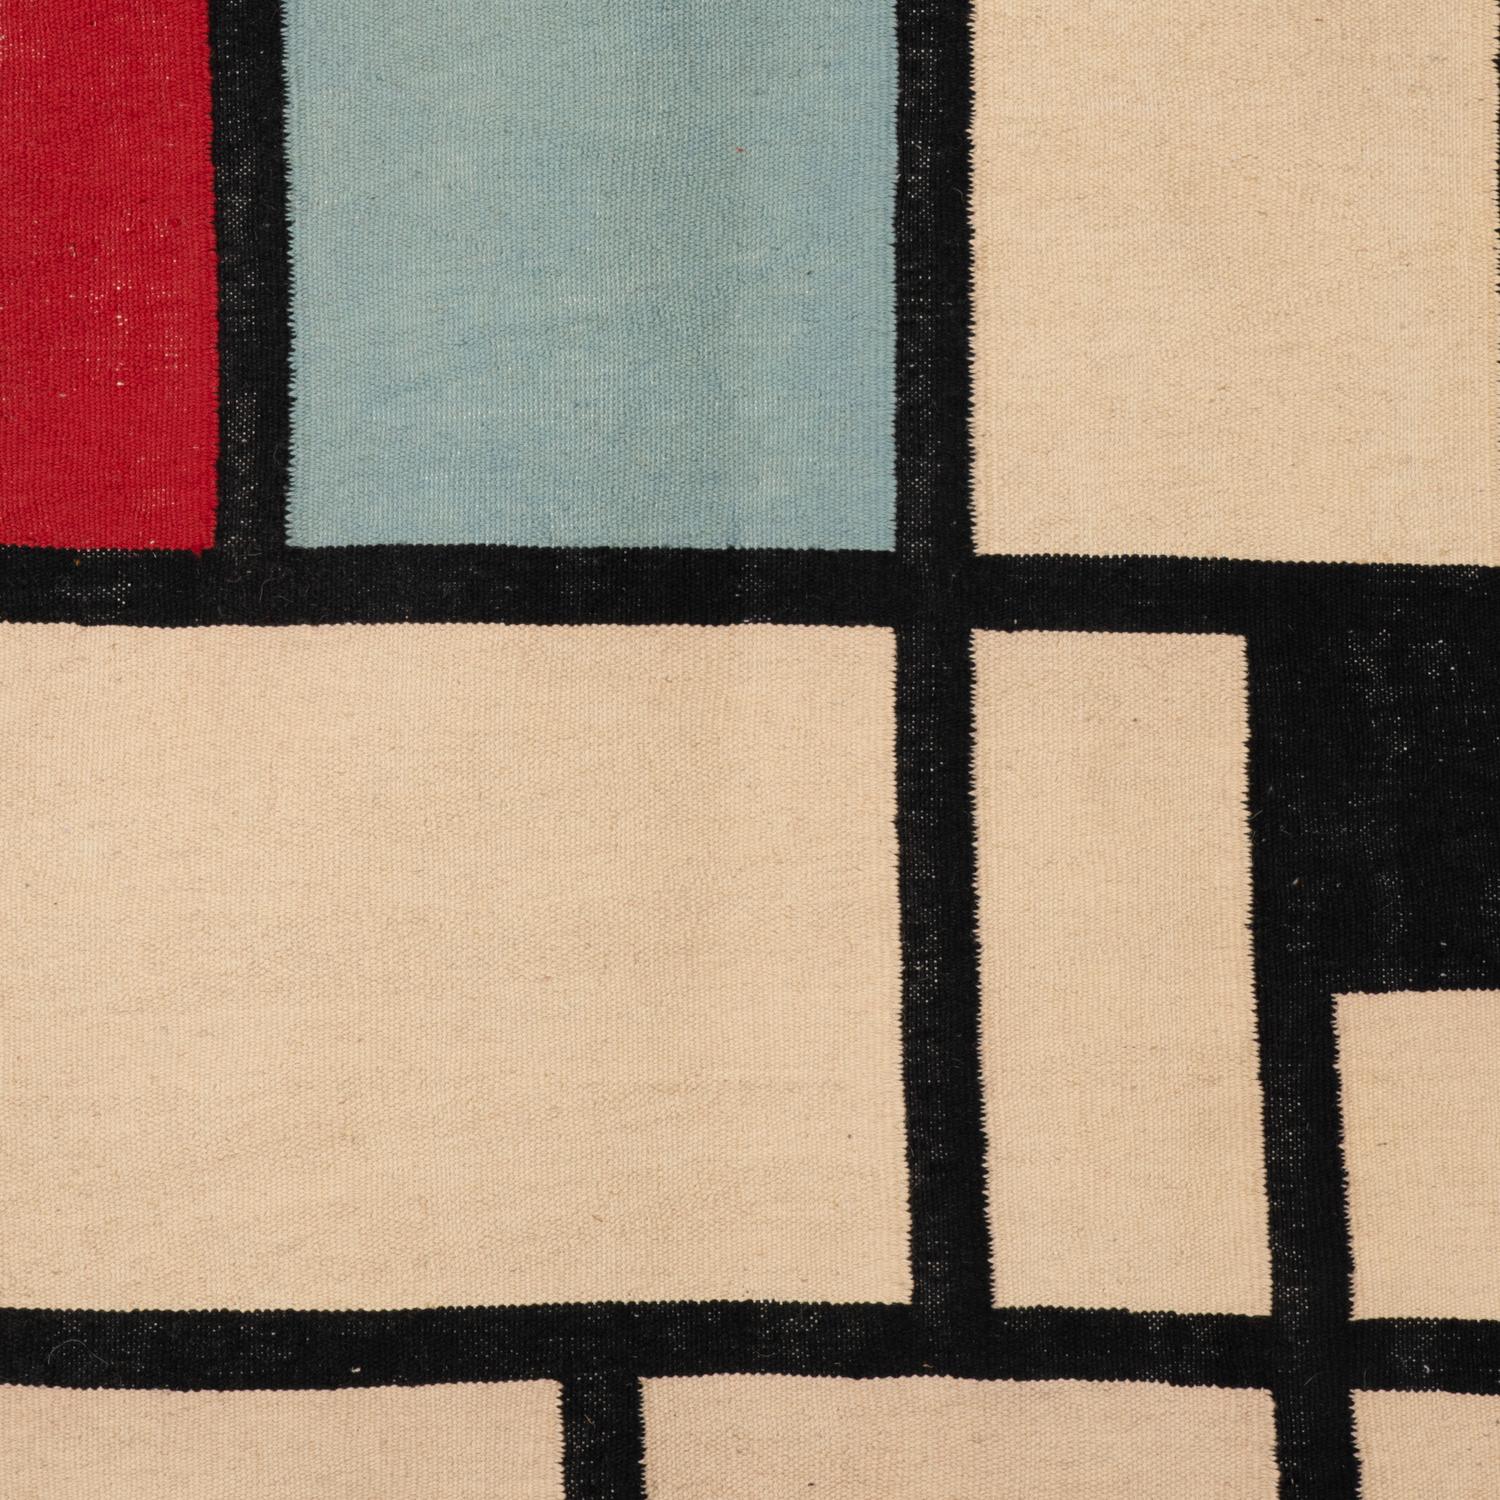 Appliqué Rug, or tapestry, inspired by Piet Mondrian. Contemporary work For Sale